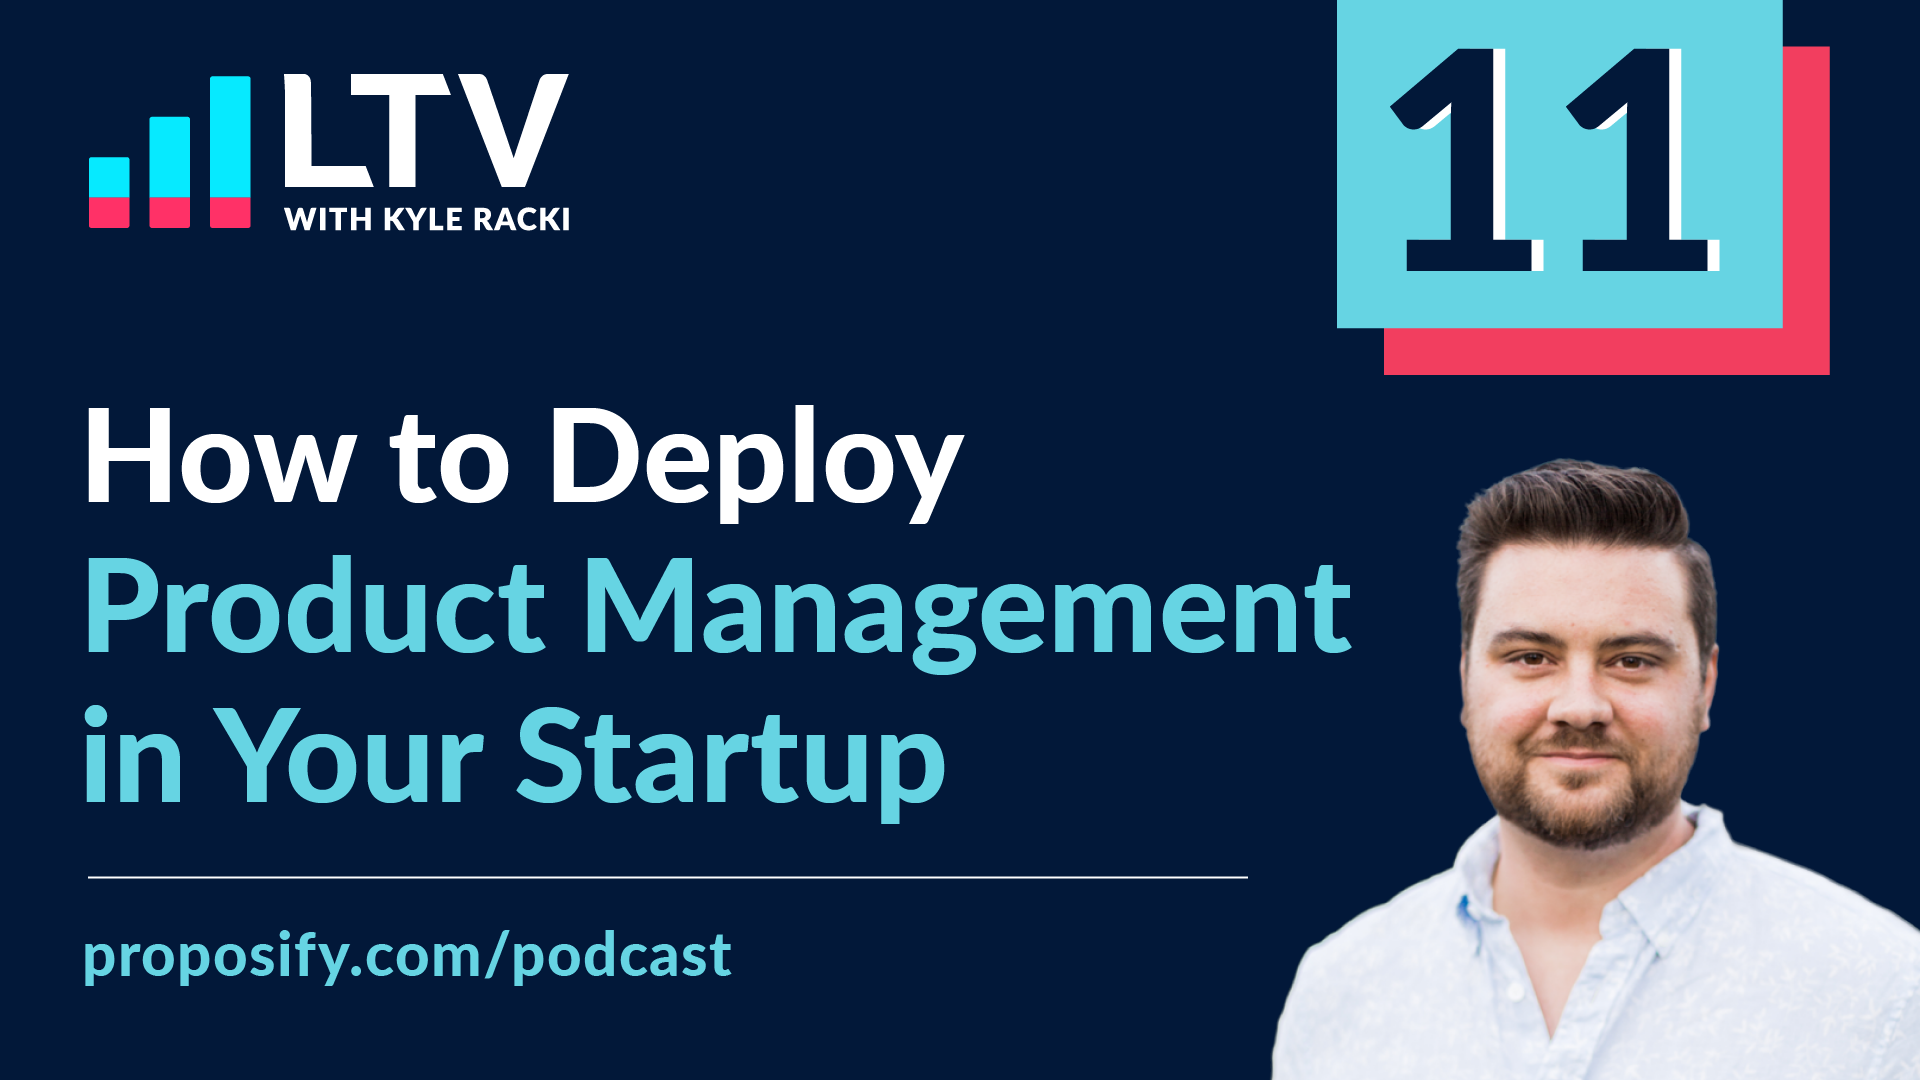 LTV Podcast Episode 11: How to Deploy Product Management in Your Startup